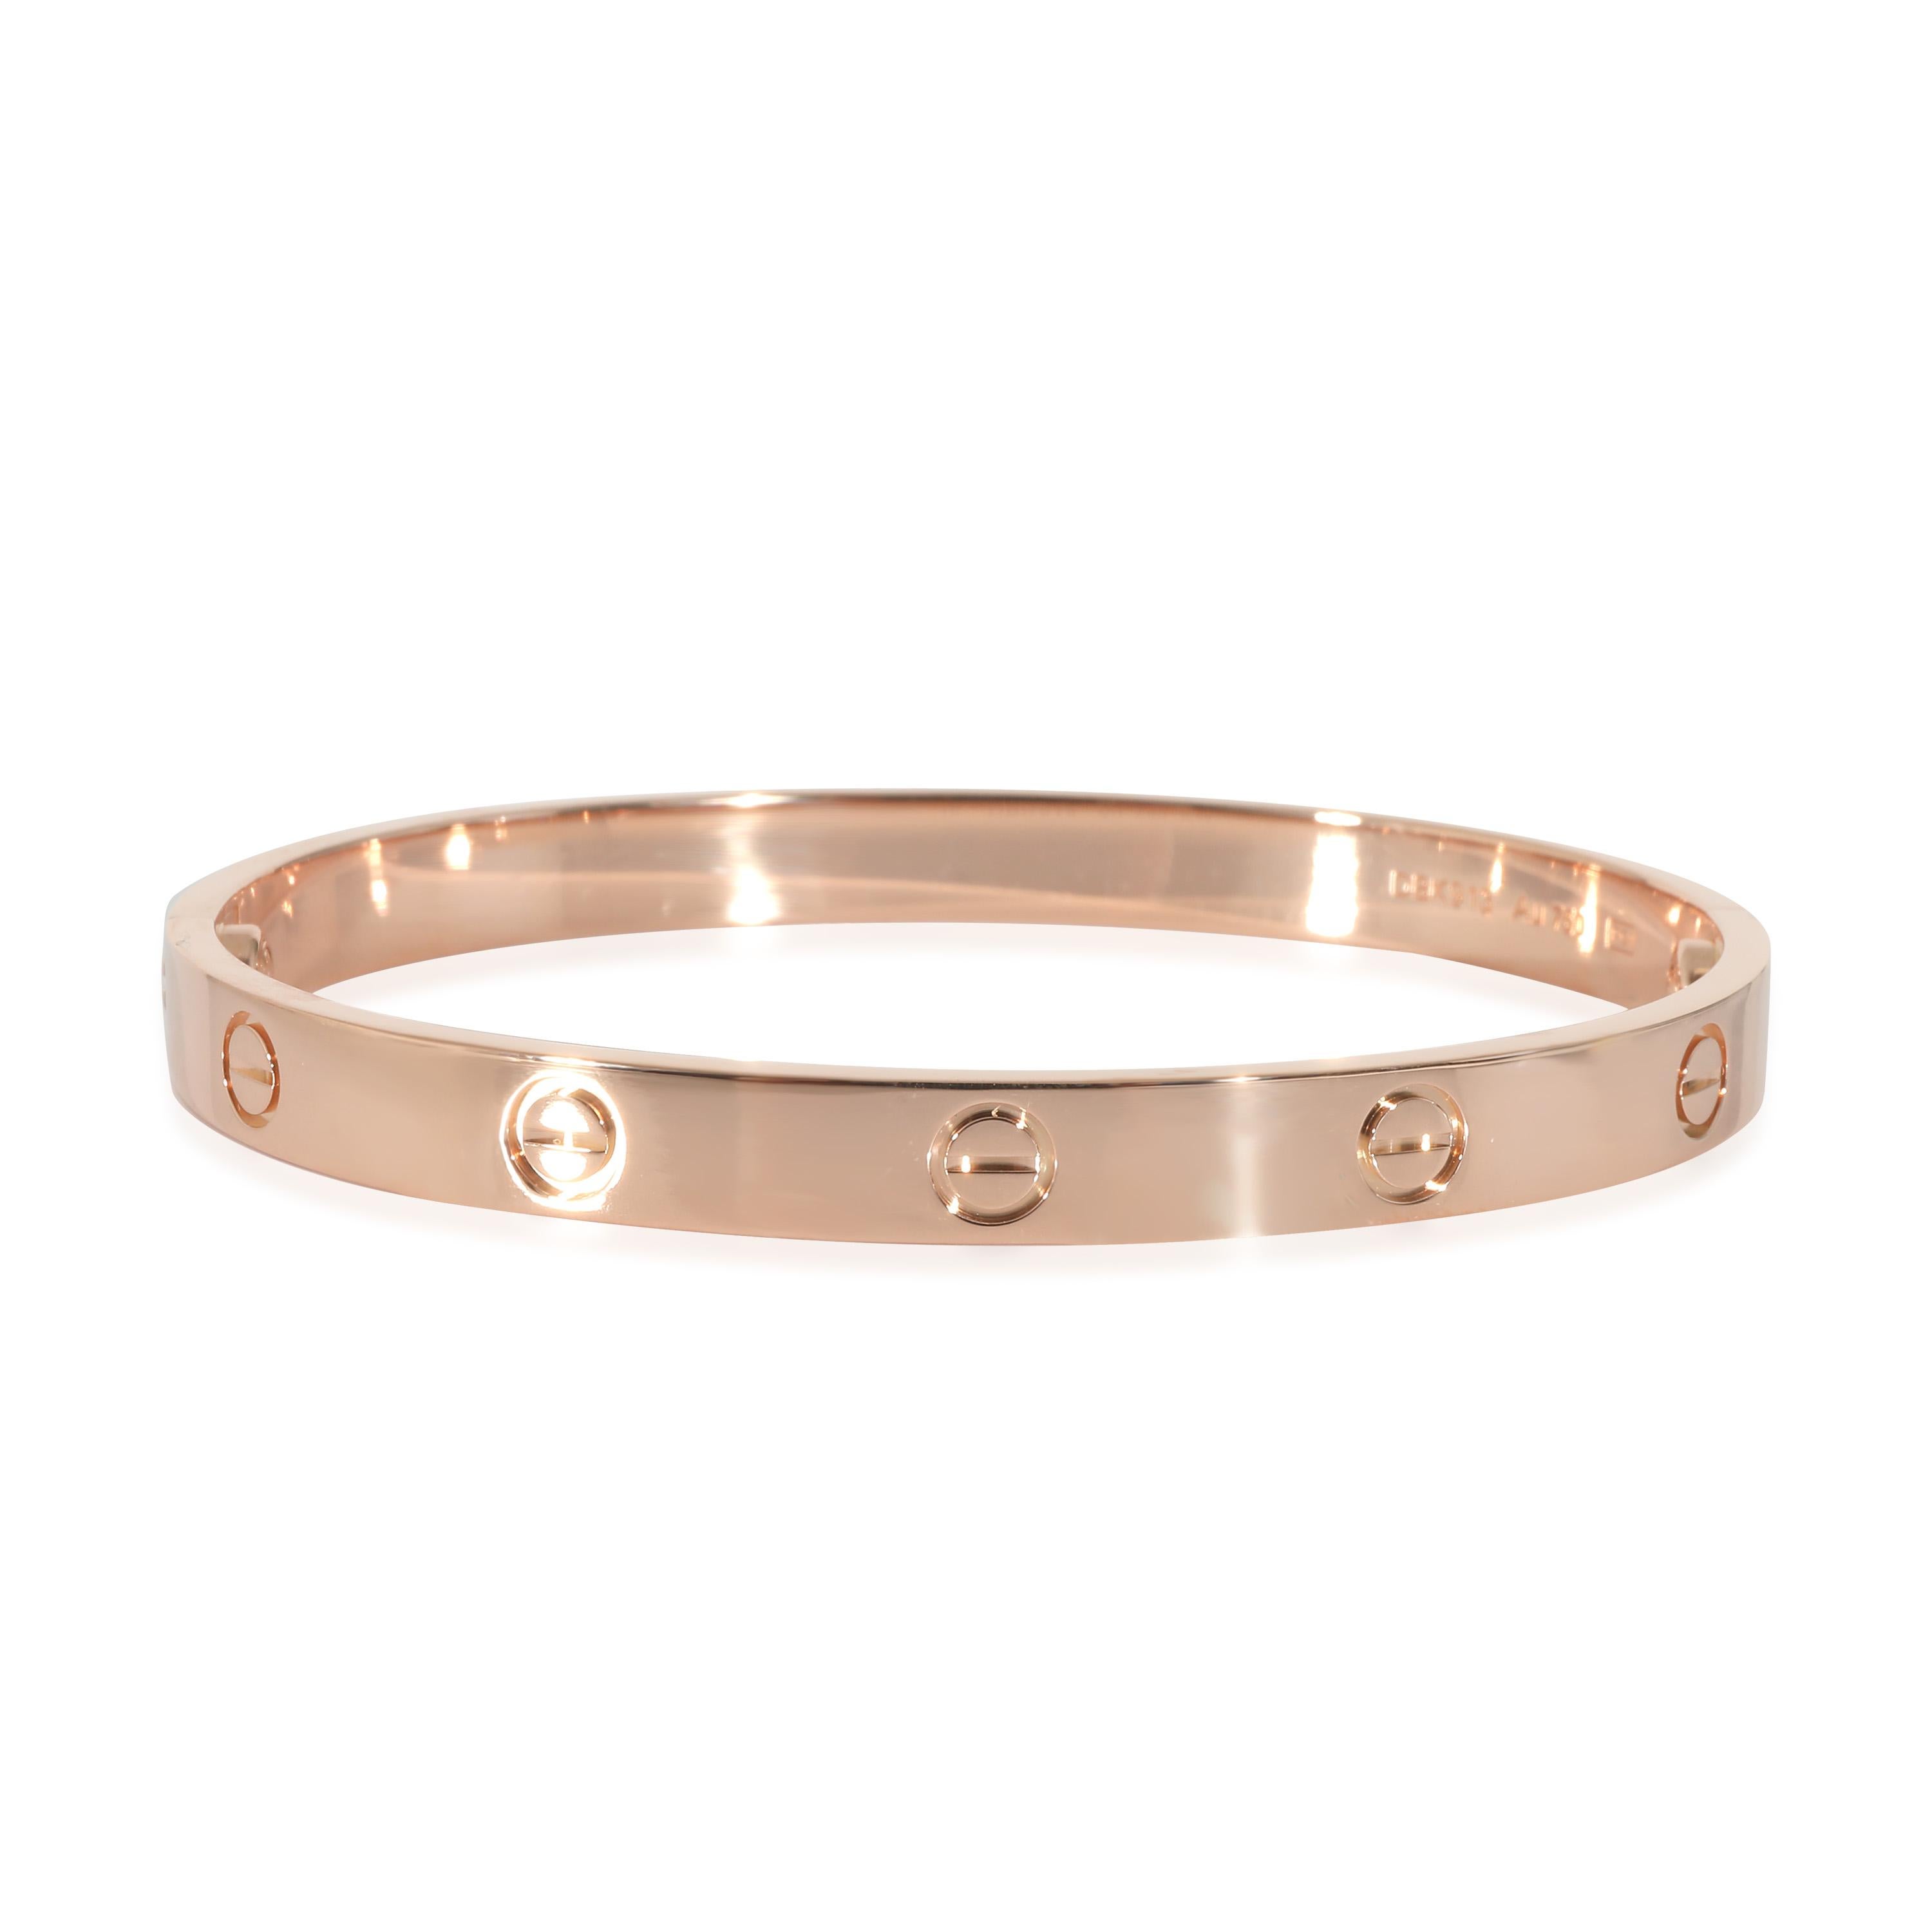 
Cartier Love Bracelet in 18k Rose Gold

PRIMARY DETAILS
SKU: 135845
Listing Title: Cartier Love Bracelet in 18k Rose Gold
Condition Description: Cartier's Love collection is the epitome of iconic, from the recognizable designs to the history behind